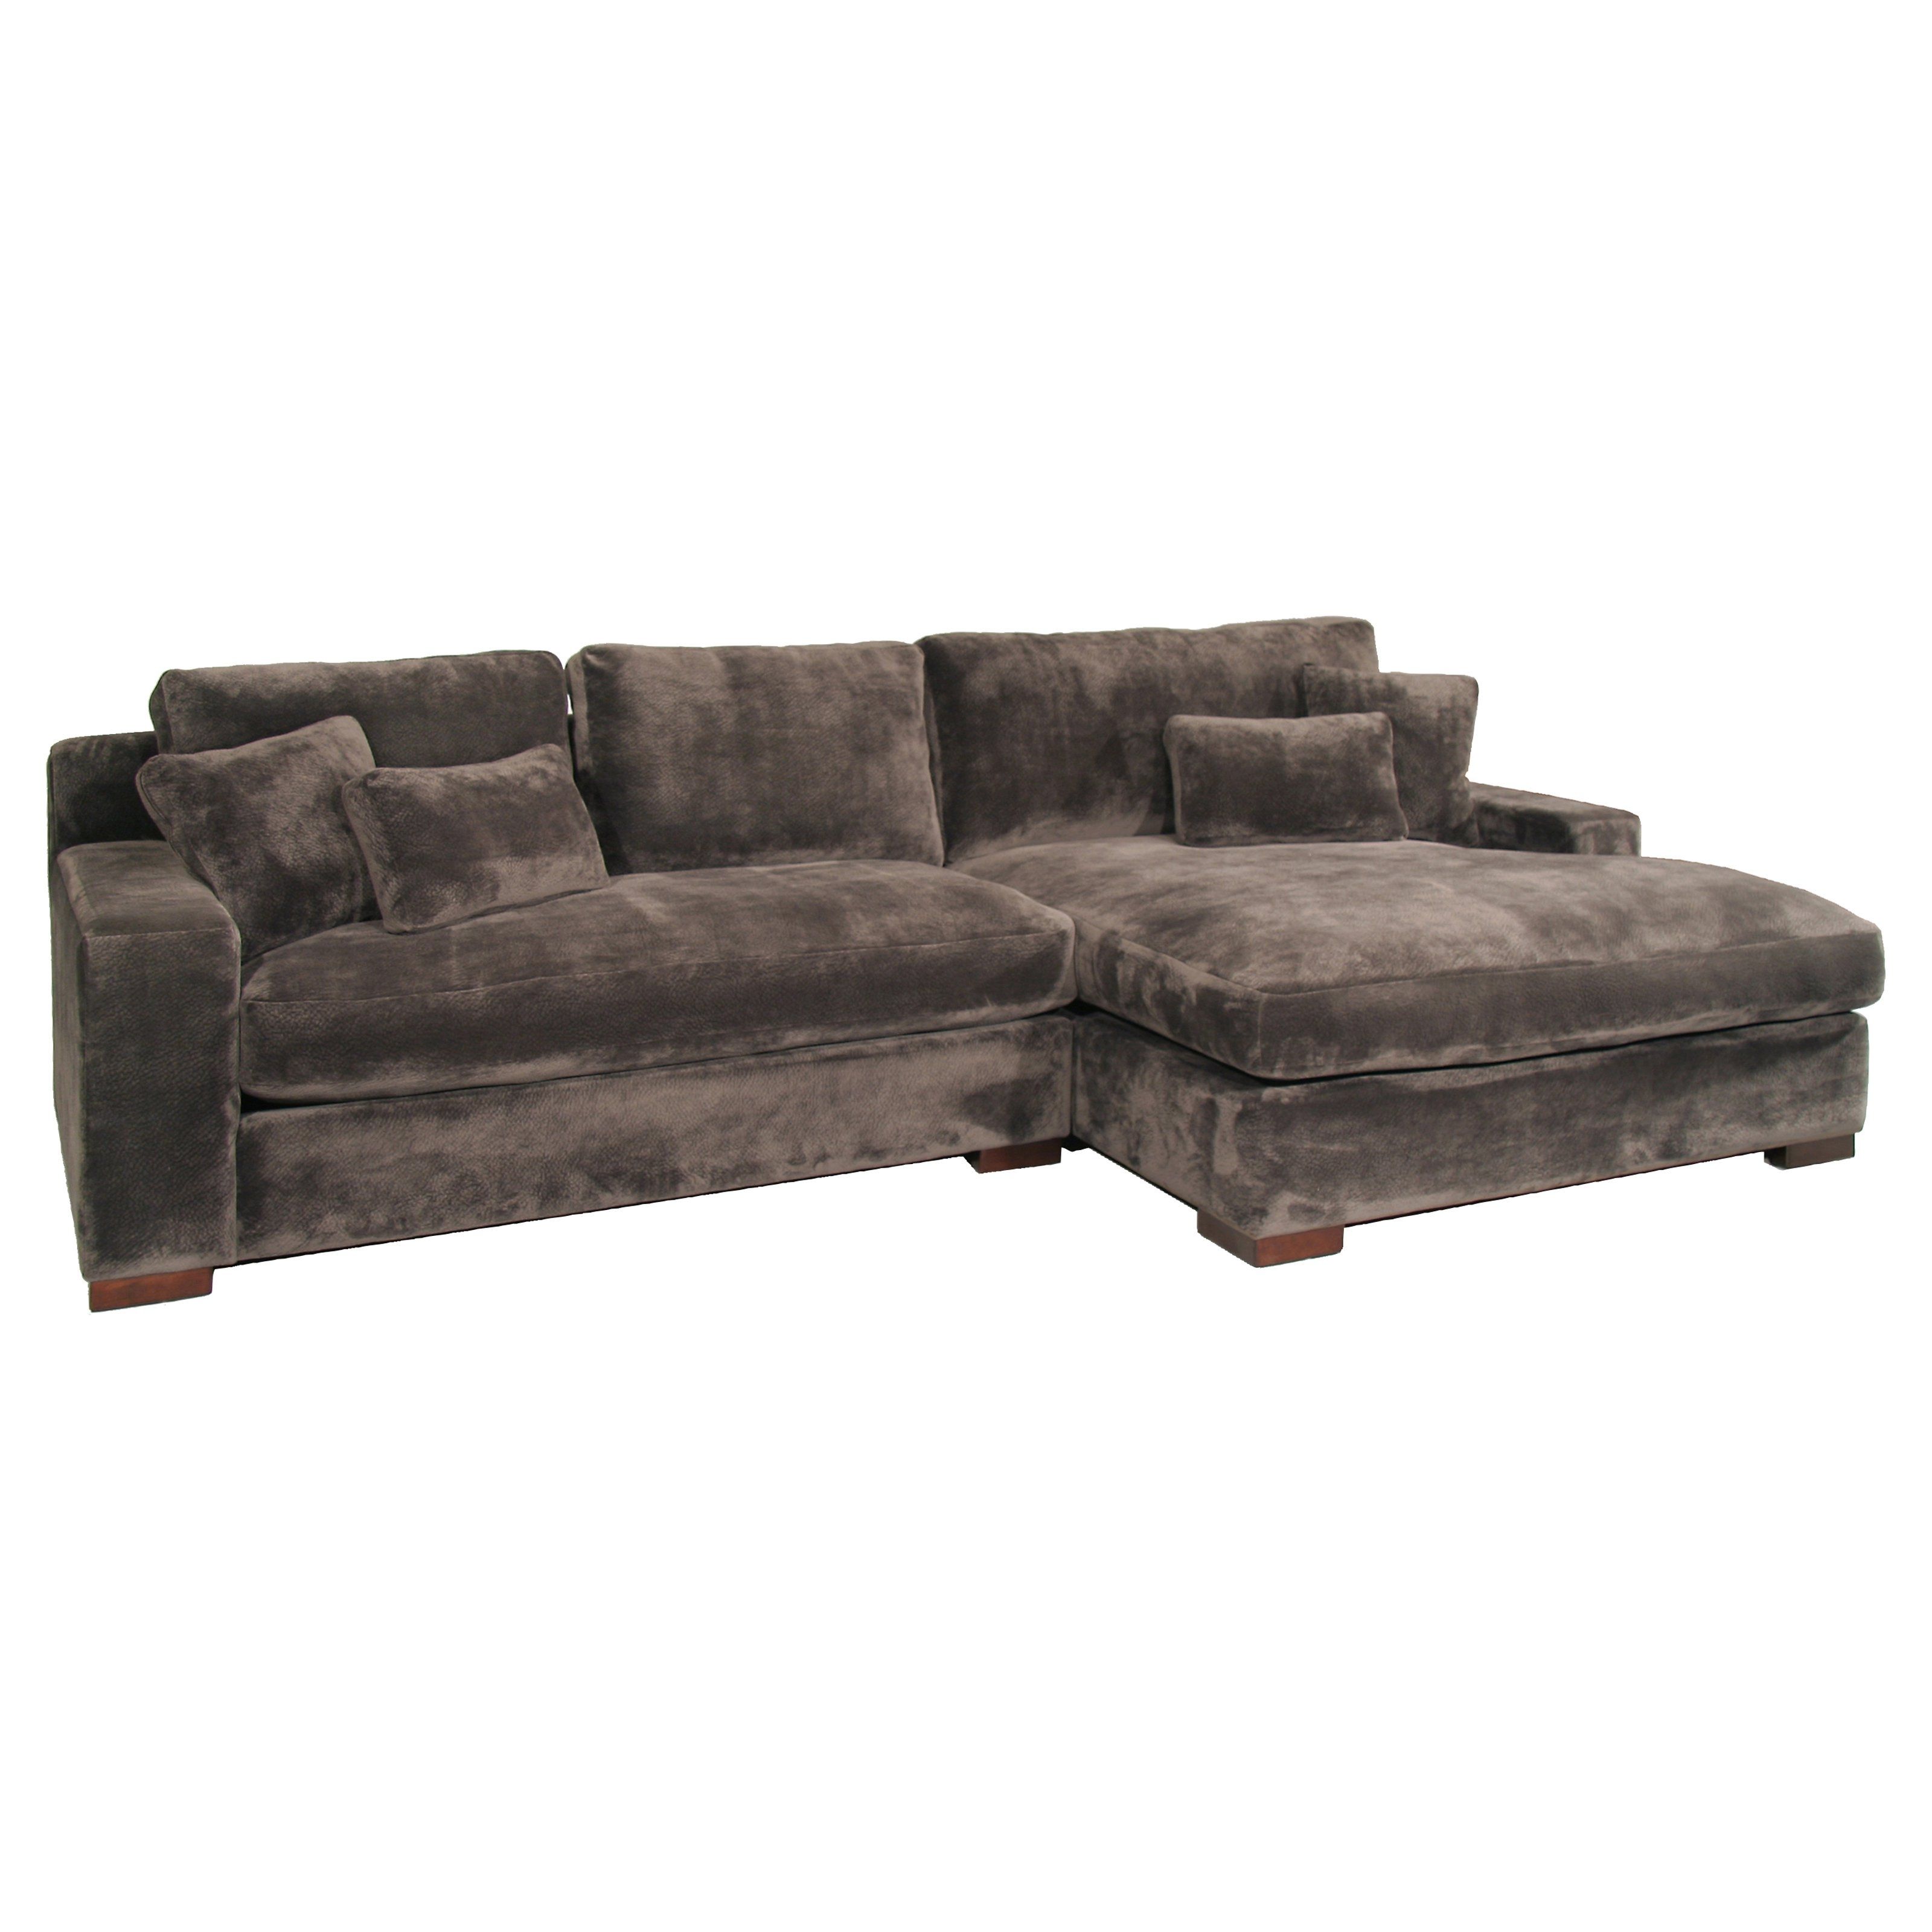 Fairmont Designs Doris 2 Piece Sectional Sofa | Hayneedle In Sierra Down 3 Piece Sectionals With Laf Chaise (View 15 of 25)